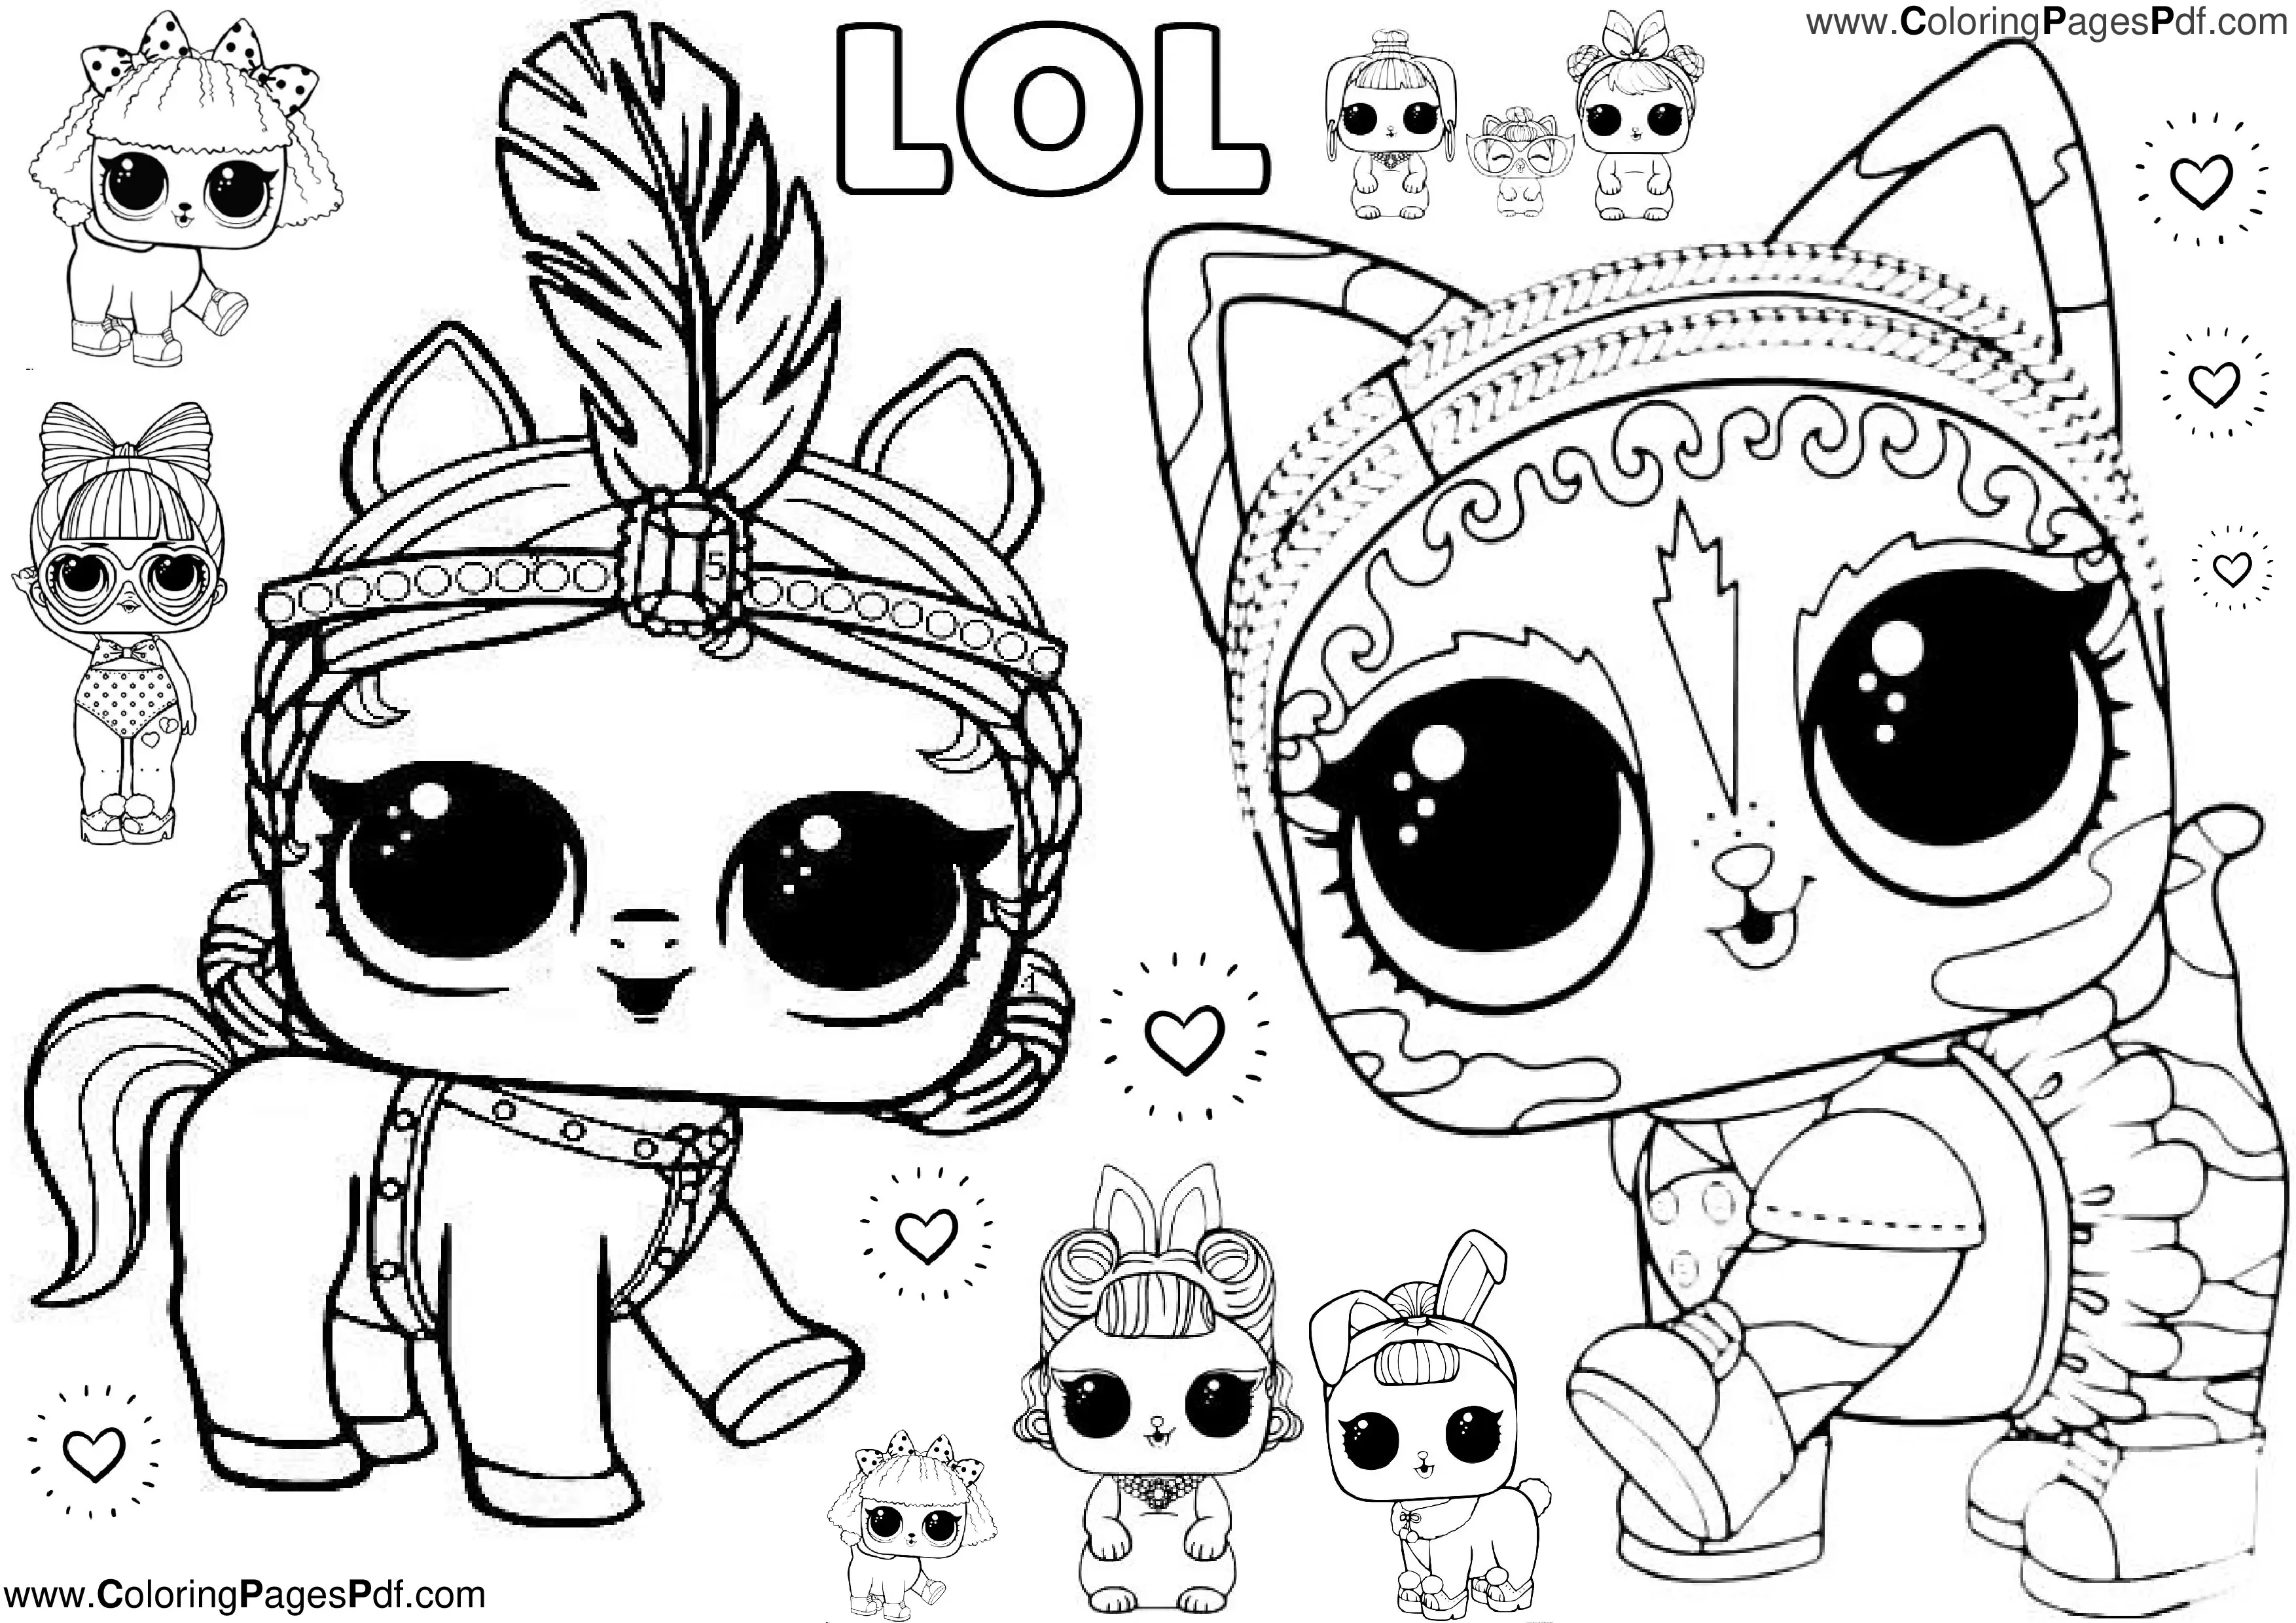 Lol pets coloring pages